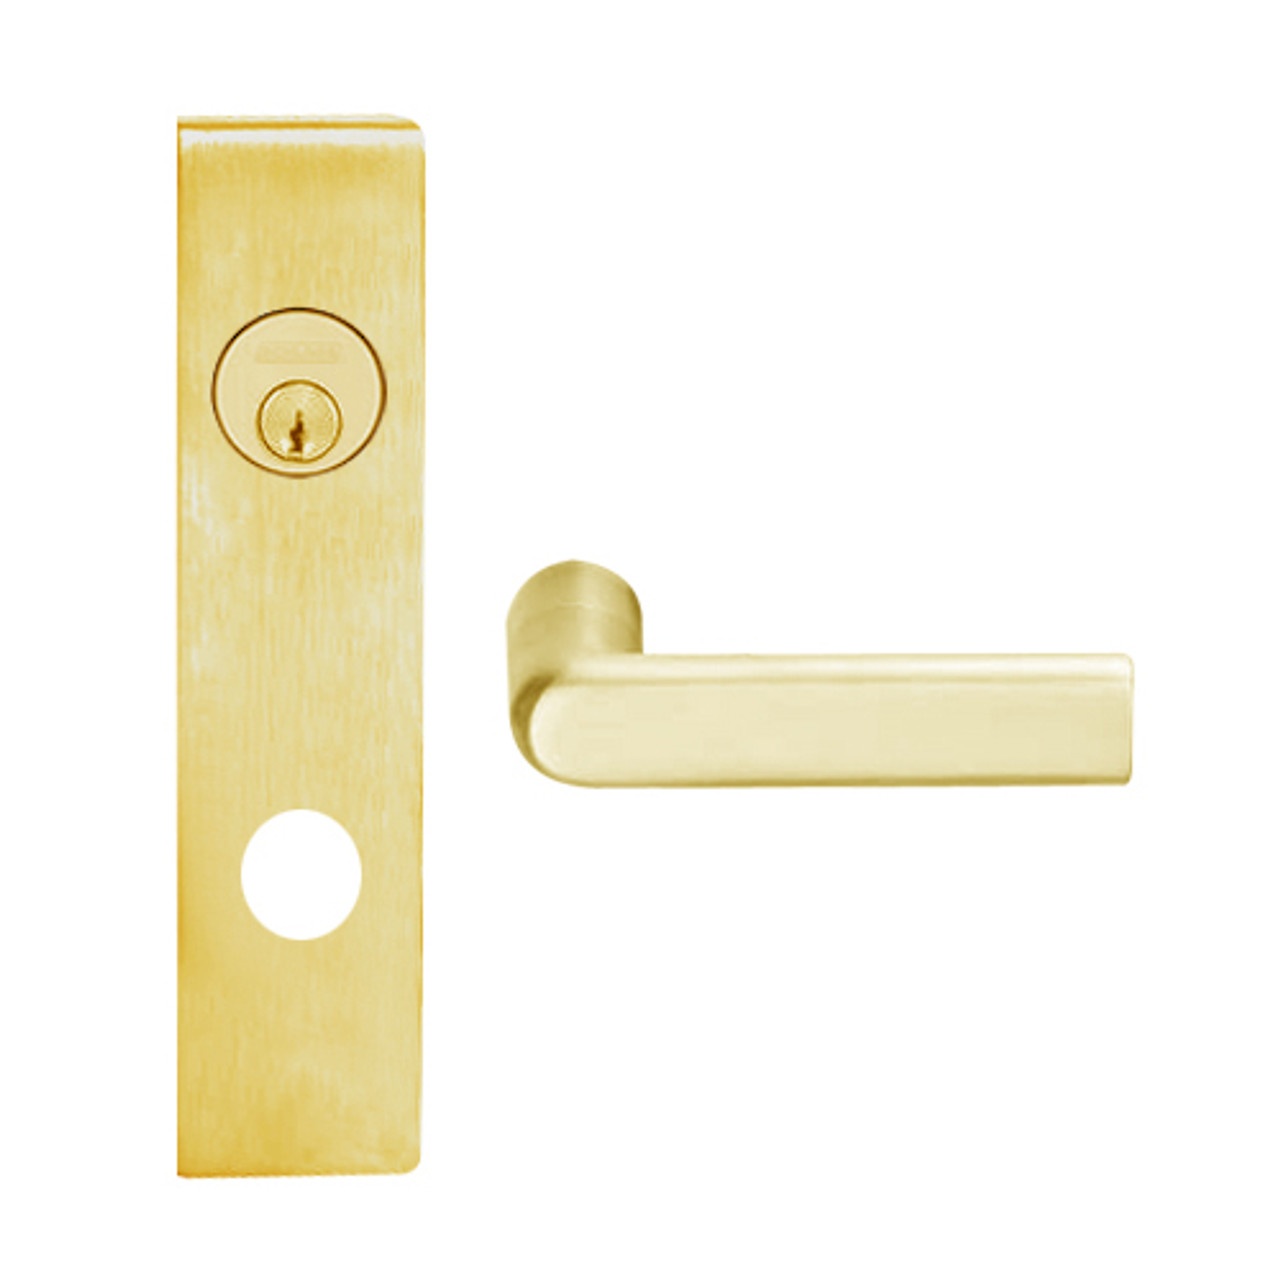 L9080P-01L-605 Schlage L Series Storeroom Commercial Mortise Lock with 01 Cast Lever Design in Bright Brass